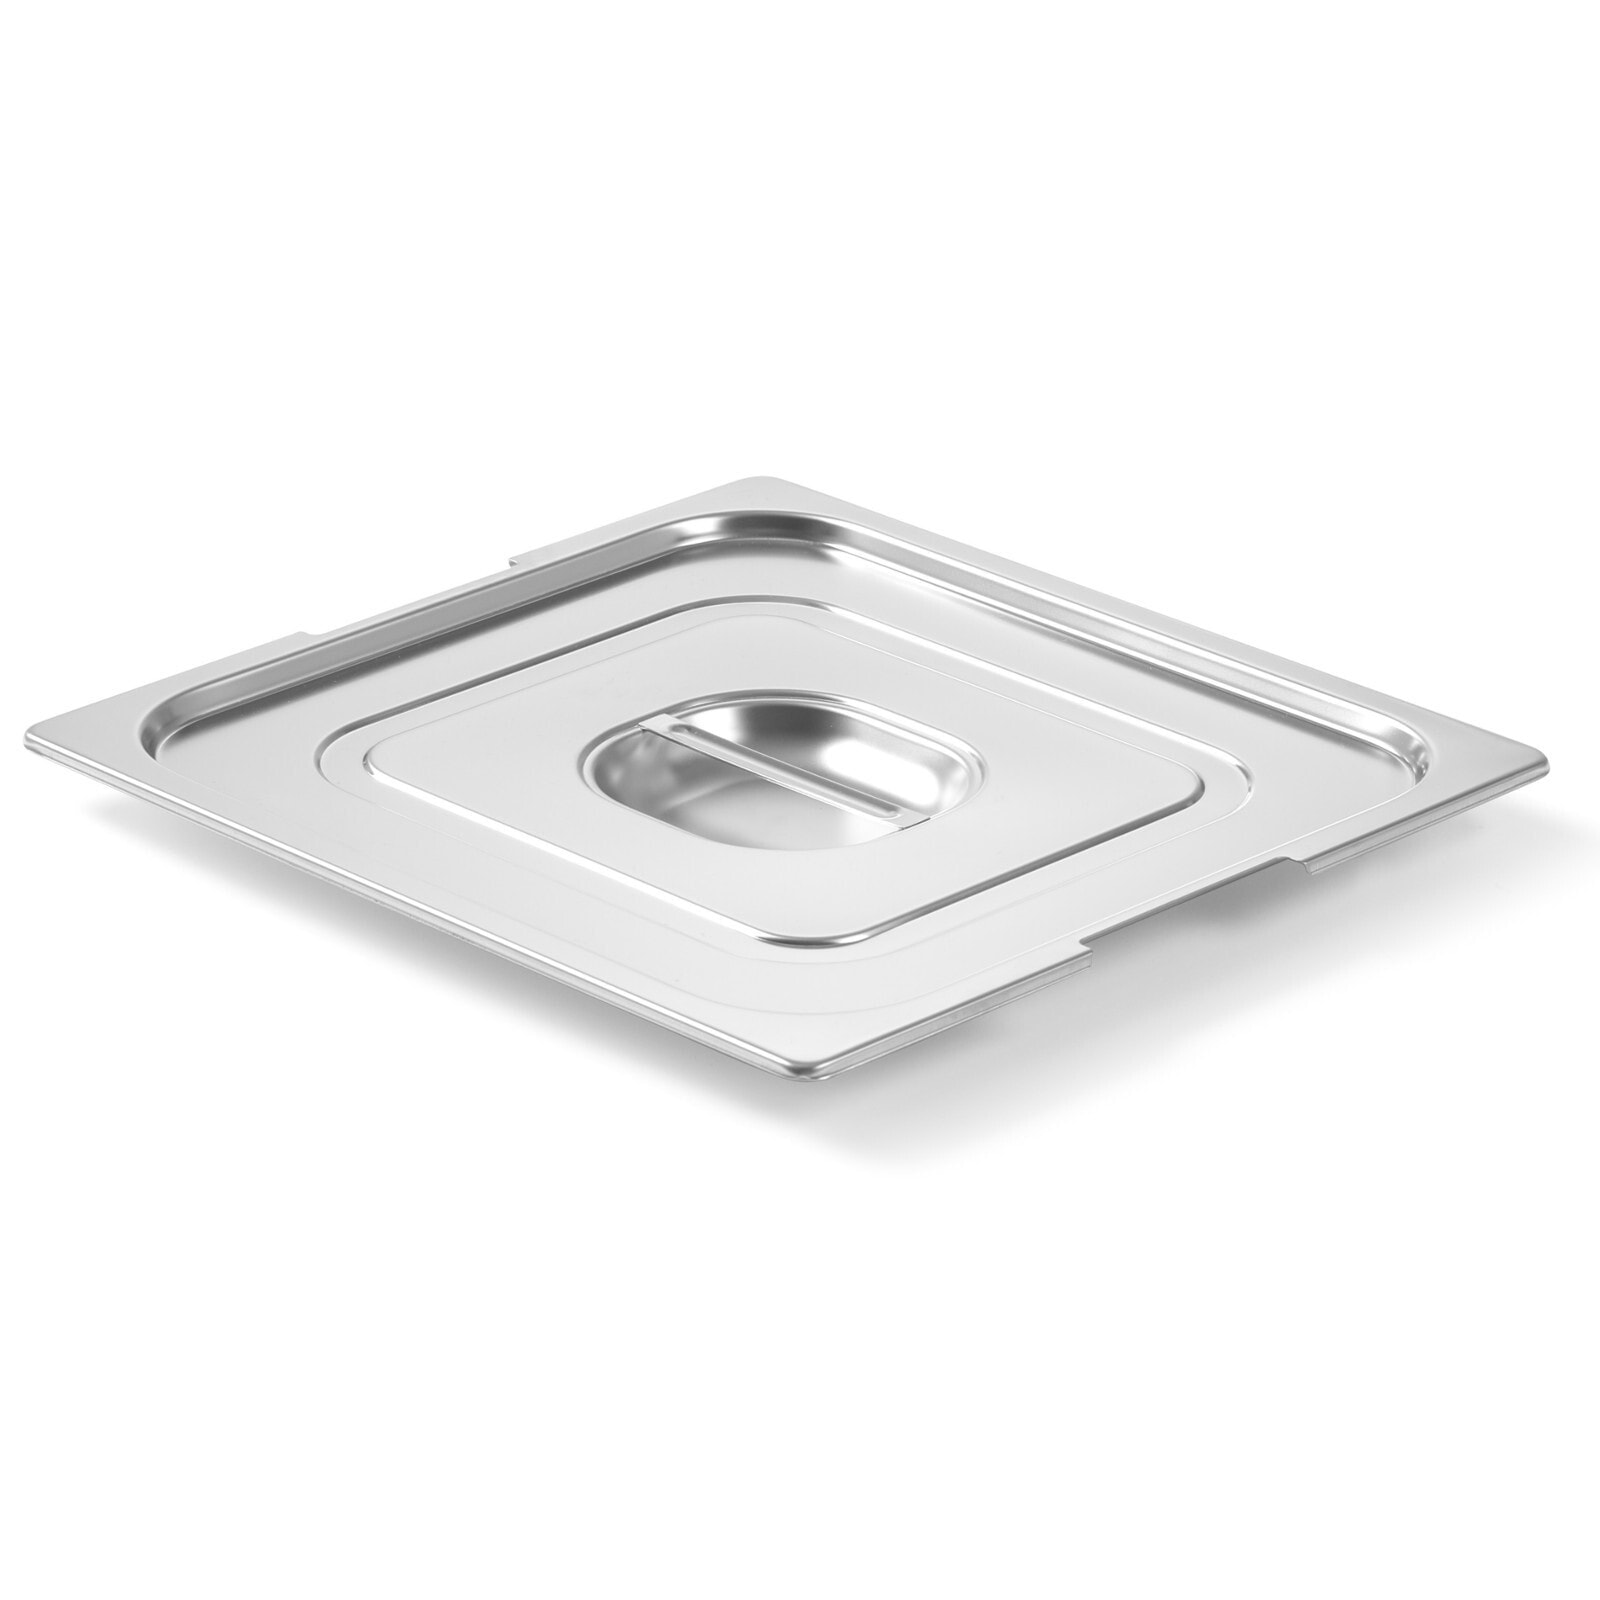 The lid for the GN container Profi Line with a cutout for the handles GN1 / 4 265x162mm, stainless steel - Hendi 804247